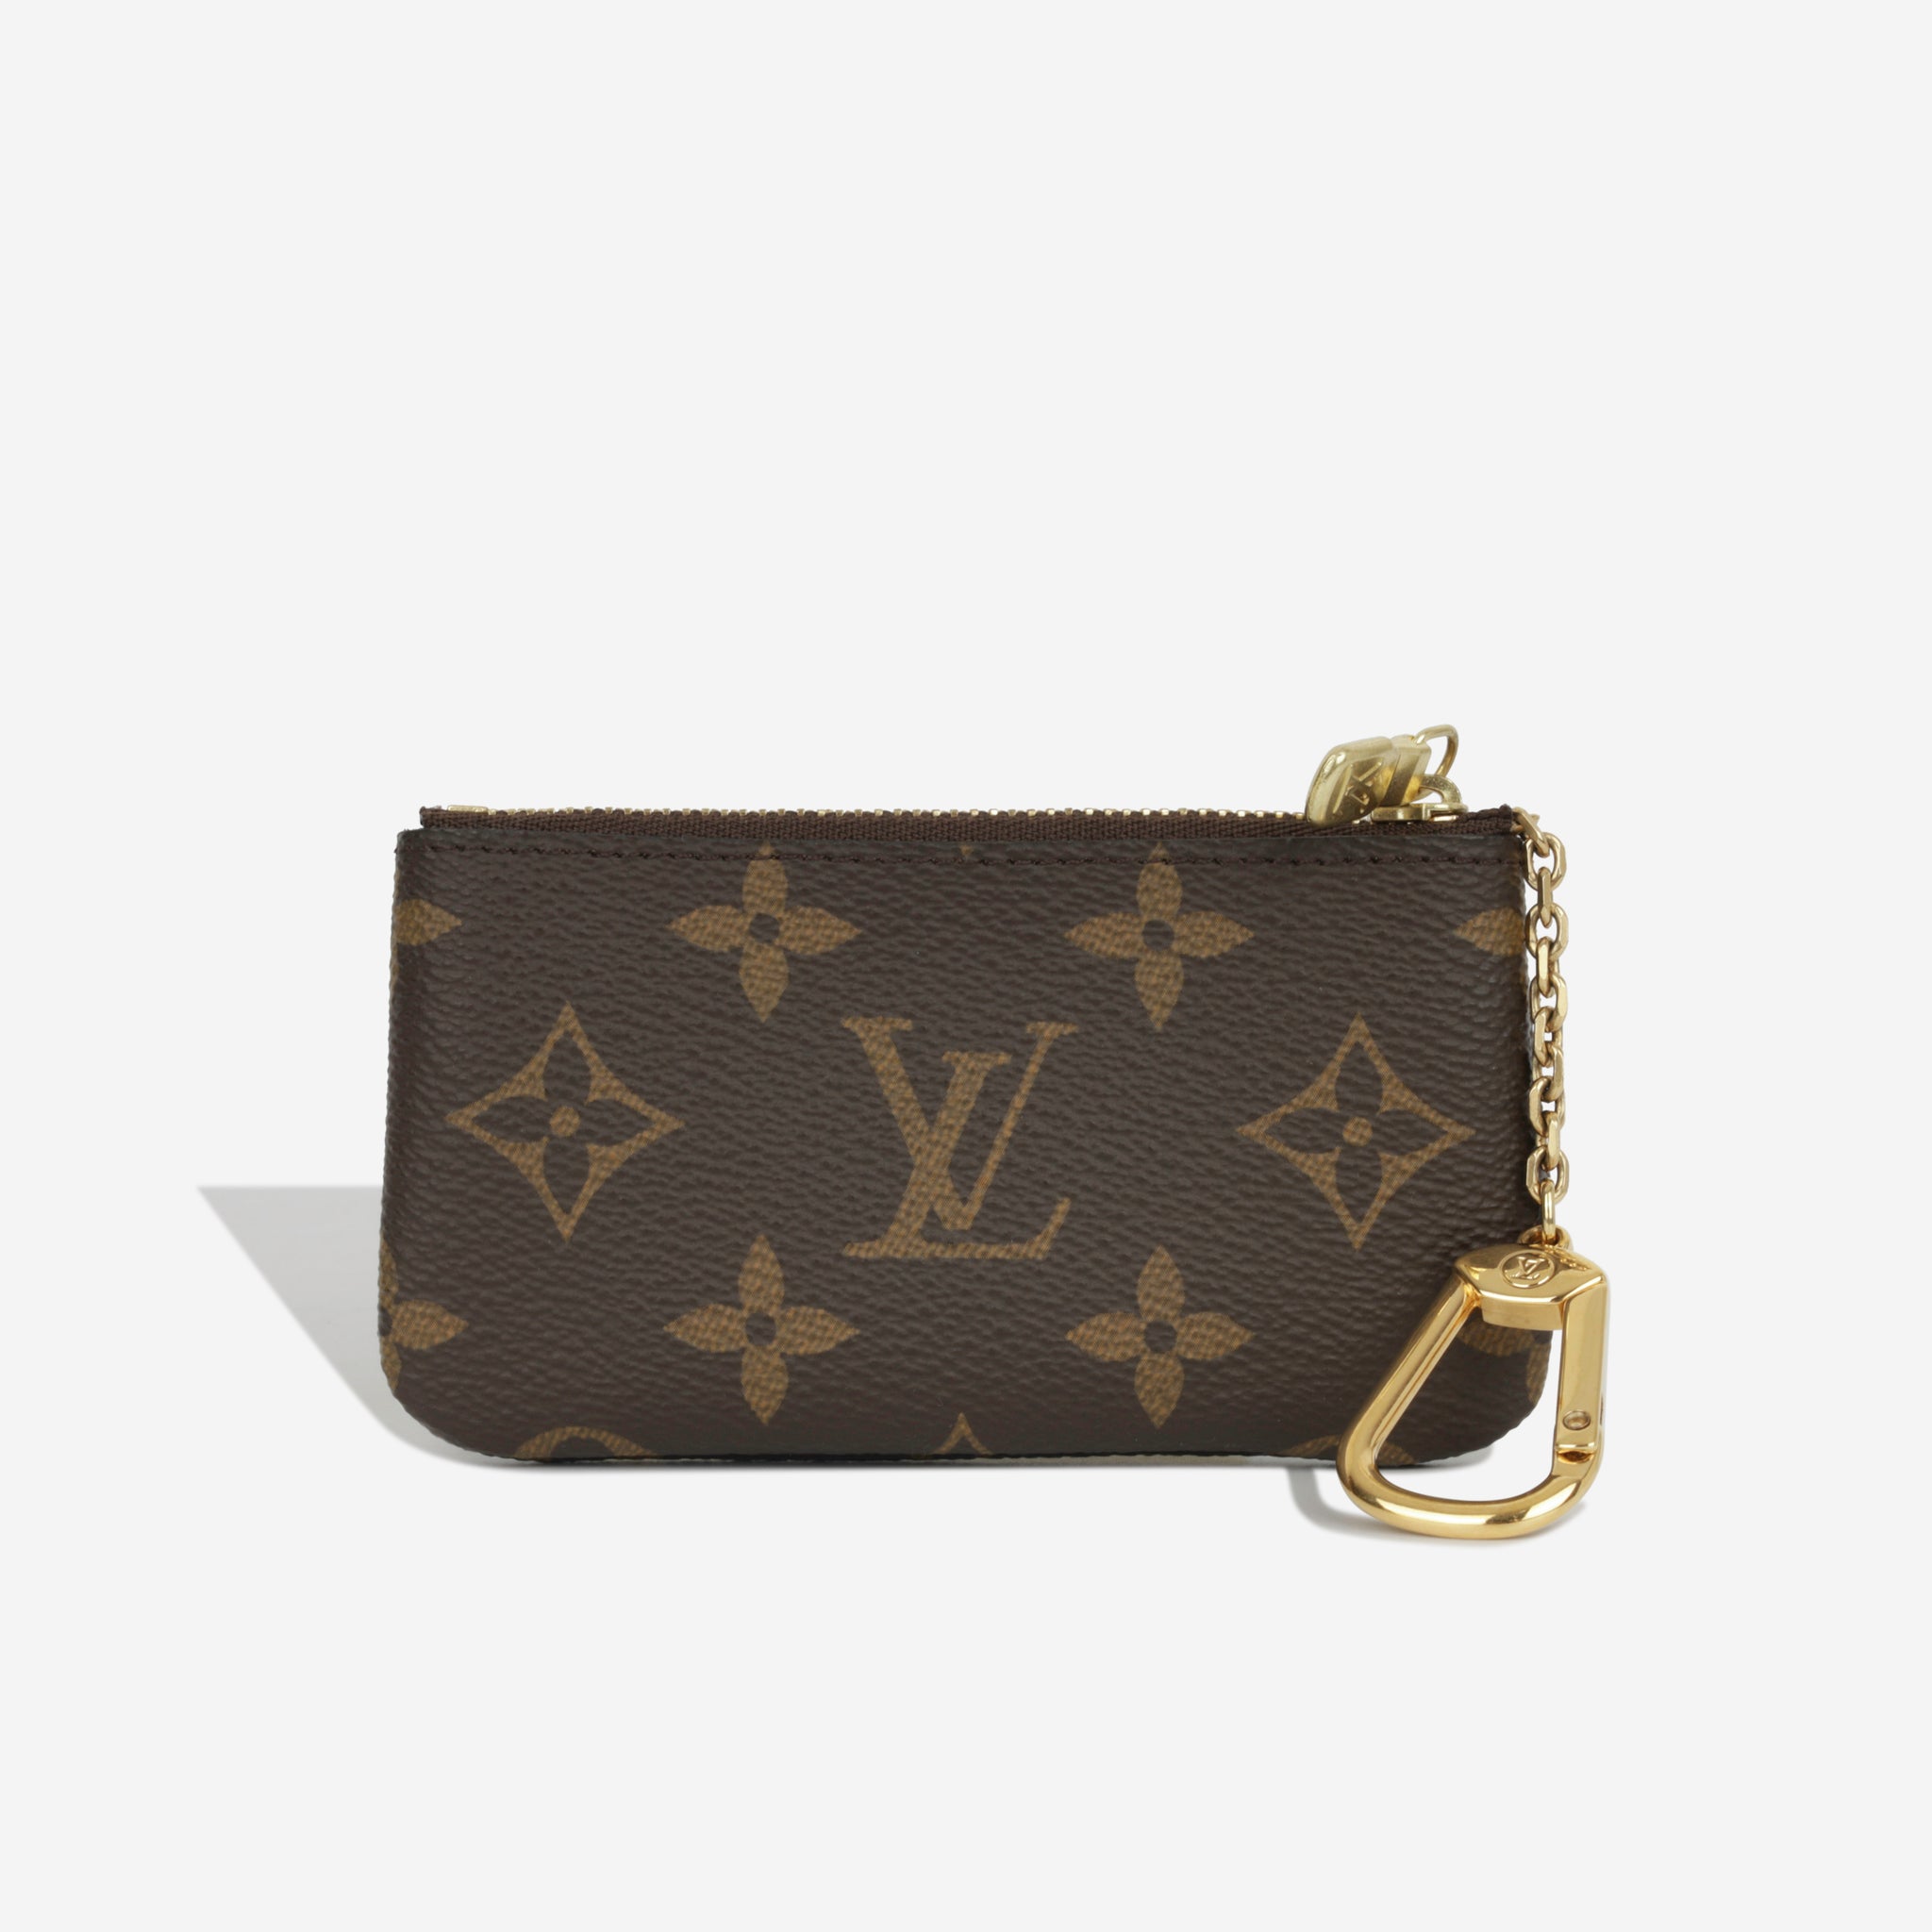 Loveyourbags - Available Now💘Brand new LOUIS VUITTON KEY POUCH